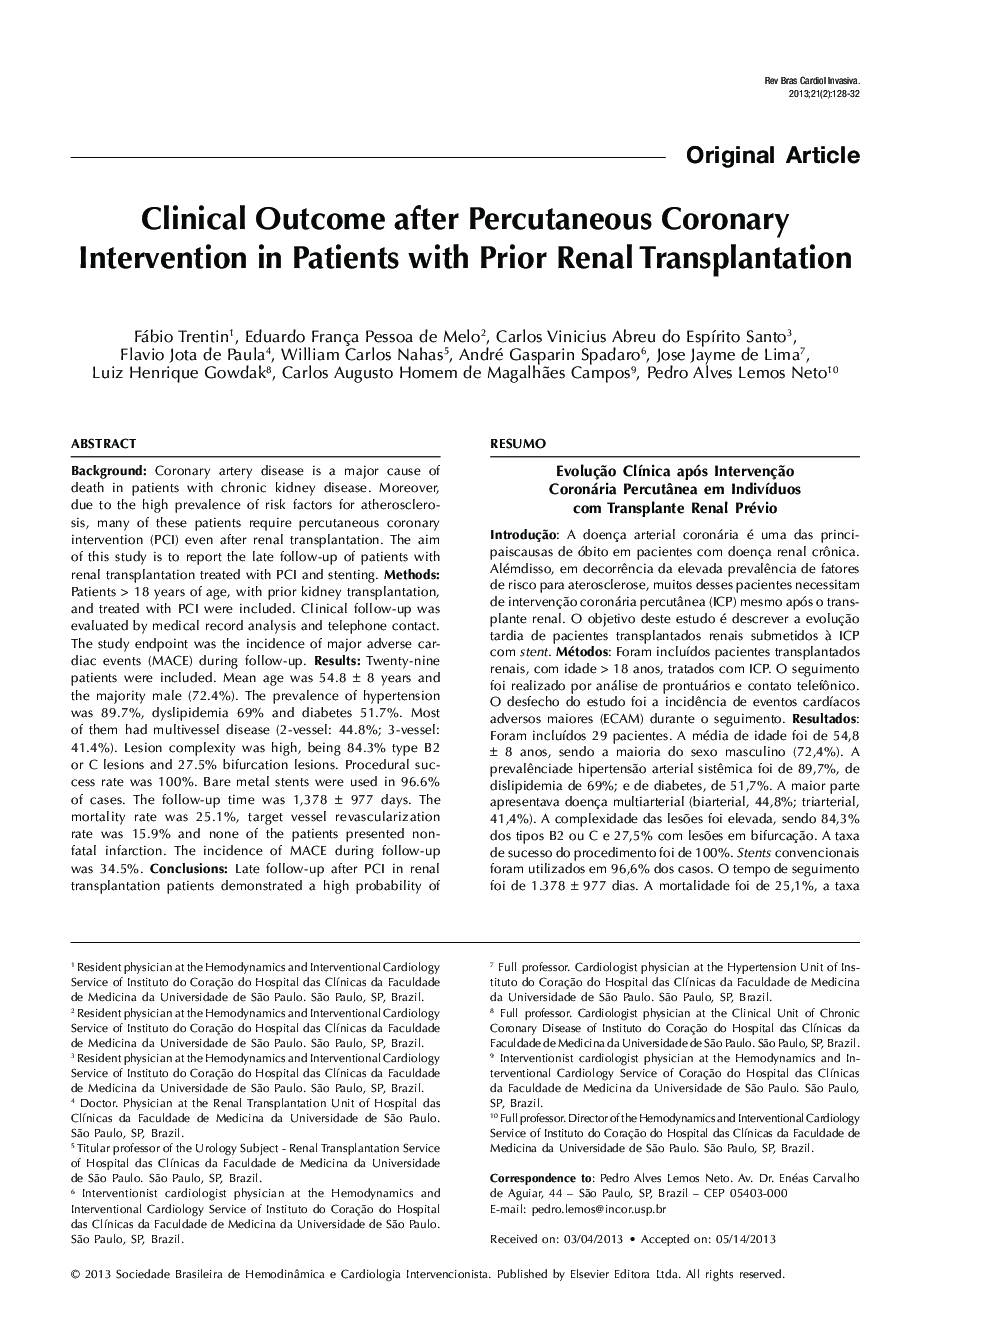 Clinical Outcome after Percutaneous Coronary Intervention in Patients with Prior Renal Transplantation